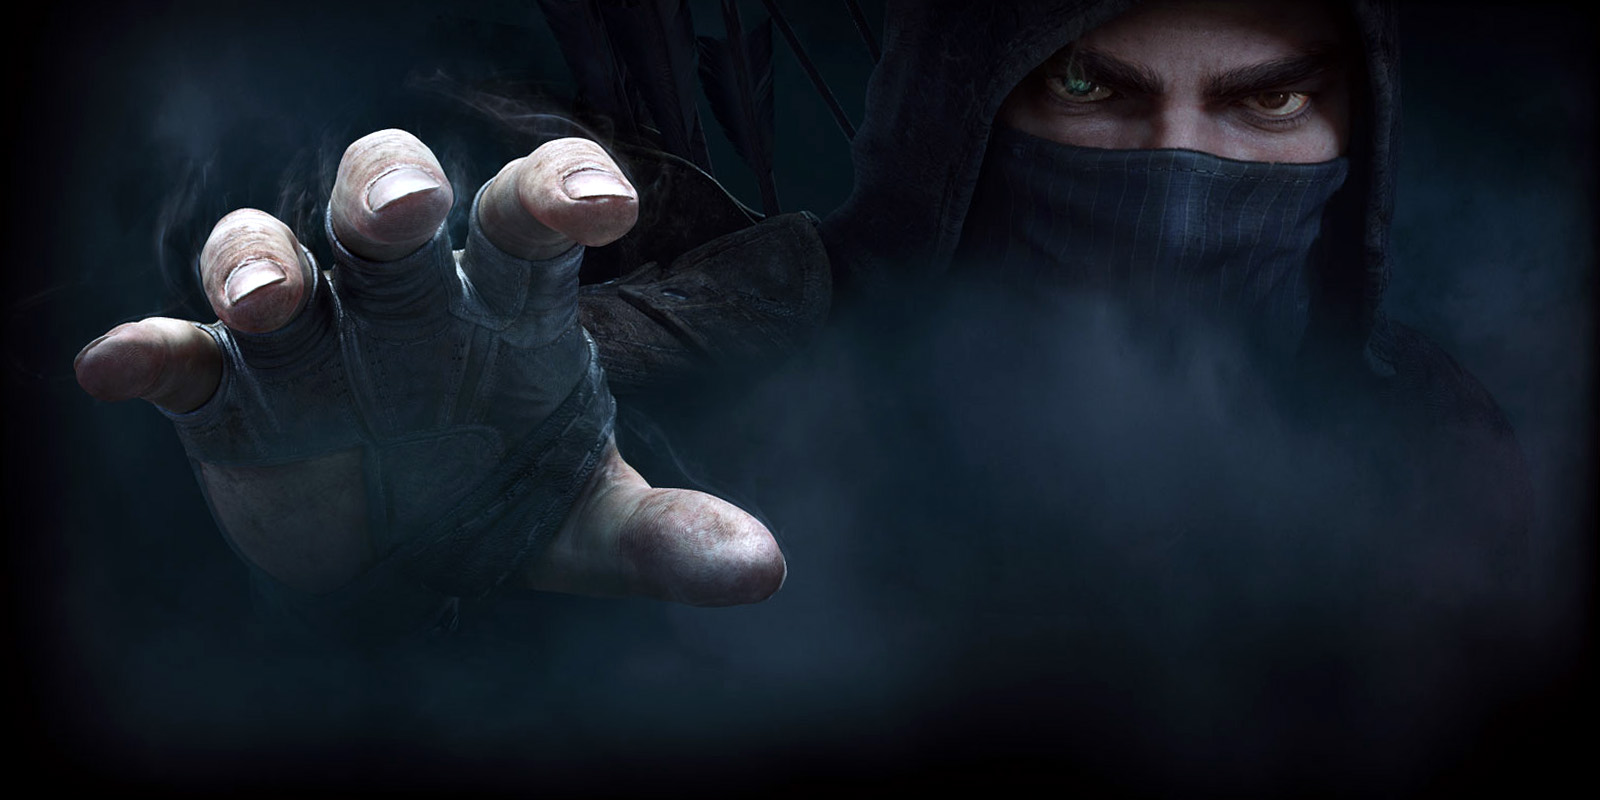 thief 2014 free full download torrent